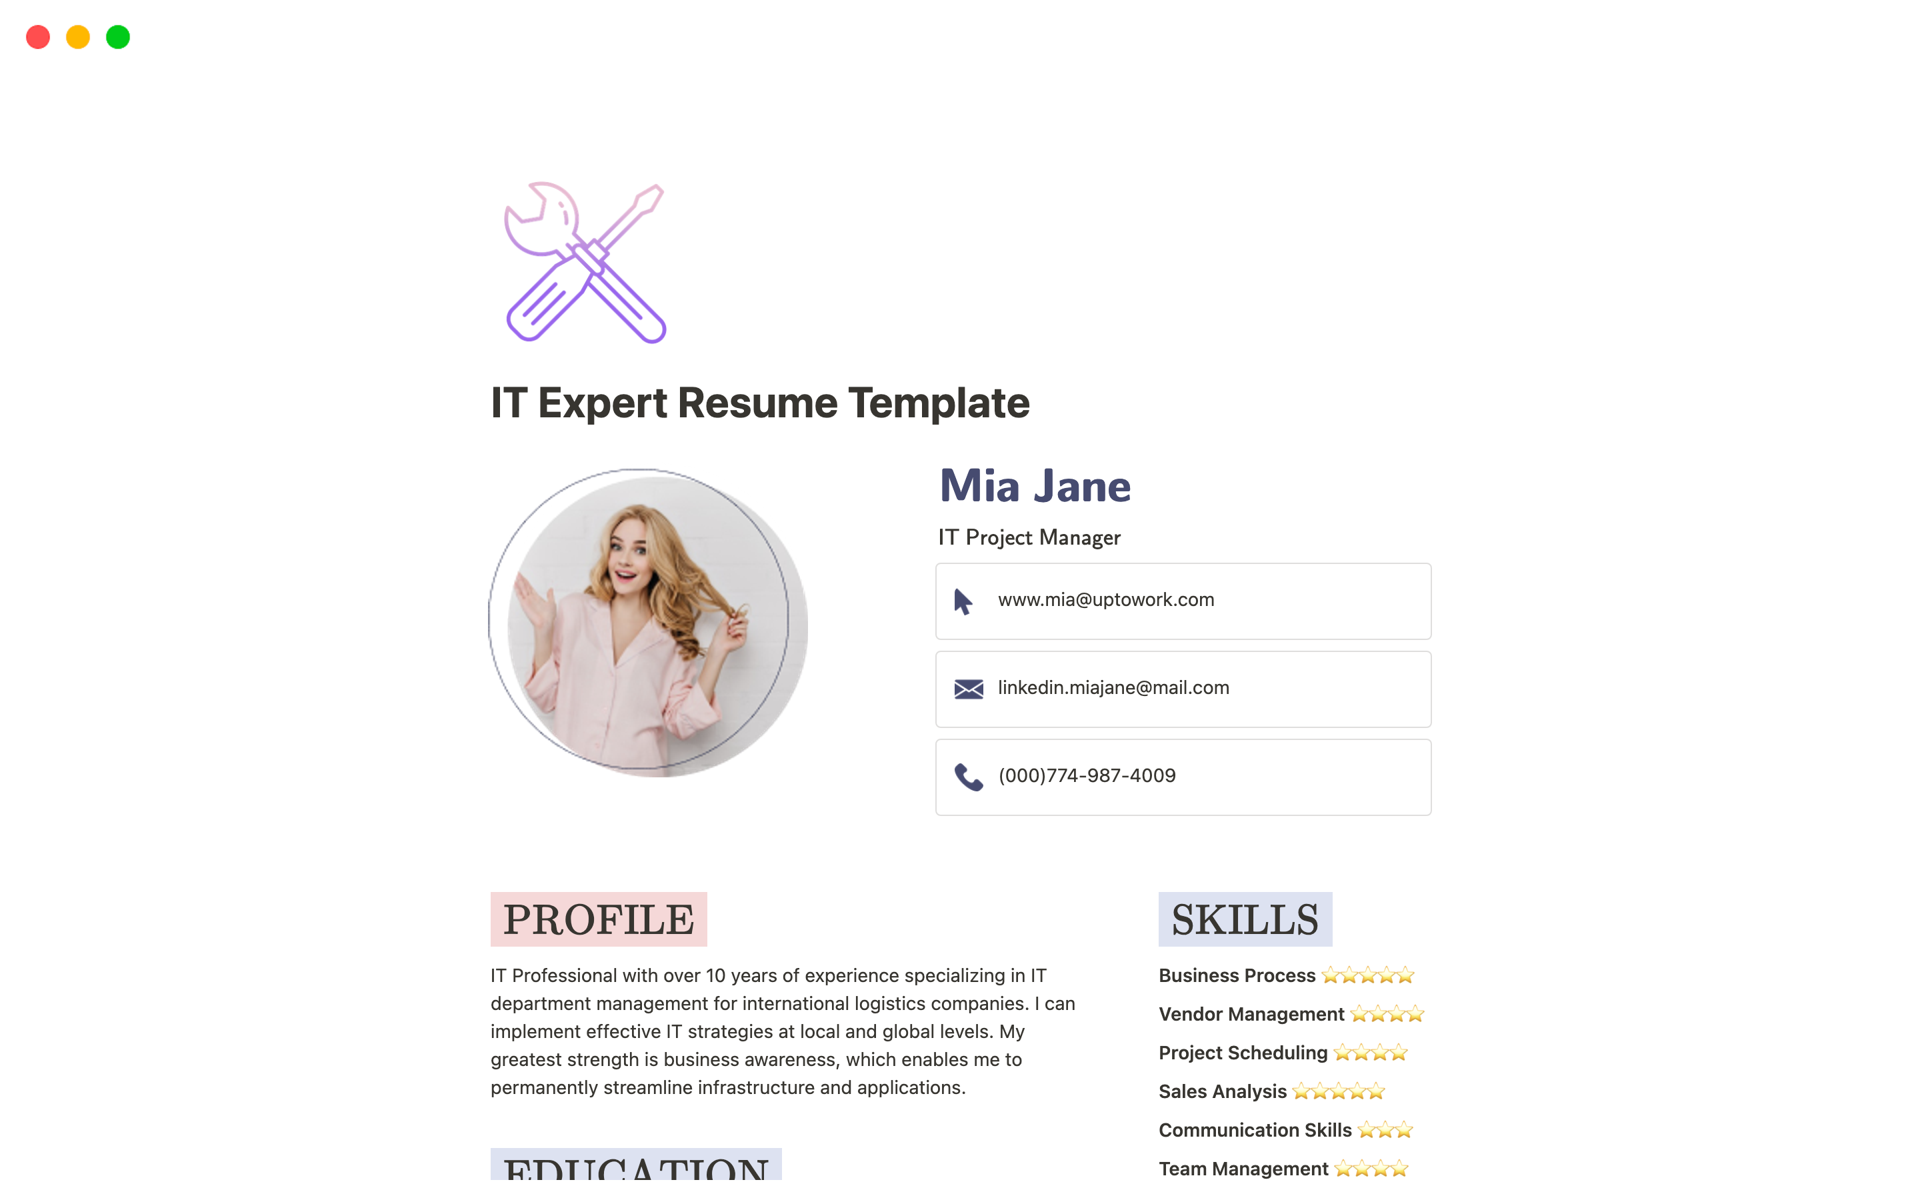 💻 IT Expert Odyssey: Tech Prodigy Edition 🌟
Embark on a tech-prodigy journey with our IT Expert Resume Template, meticulously crafted to guide you through showcasing your skills and experiences.